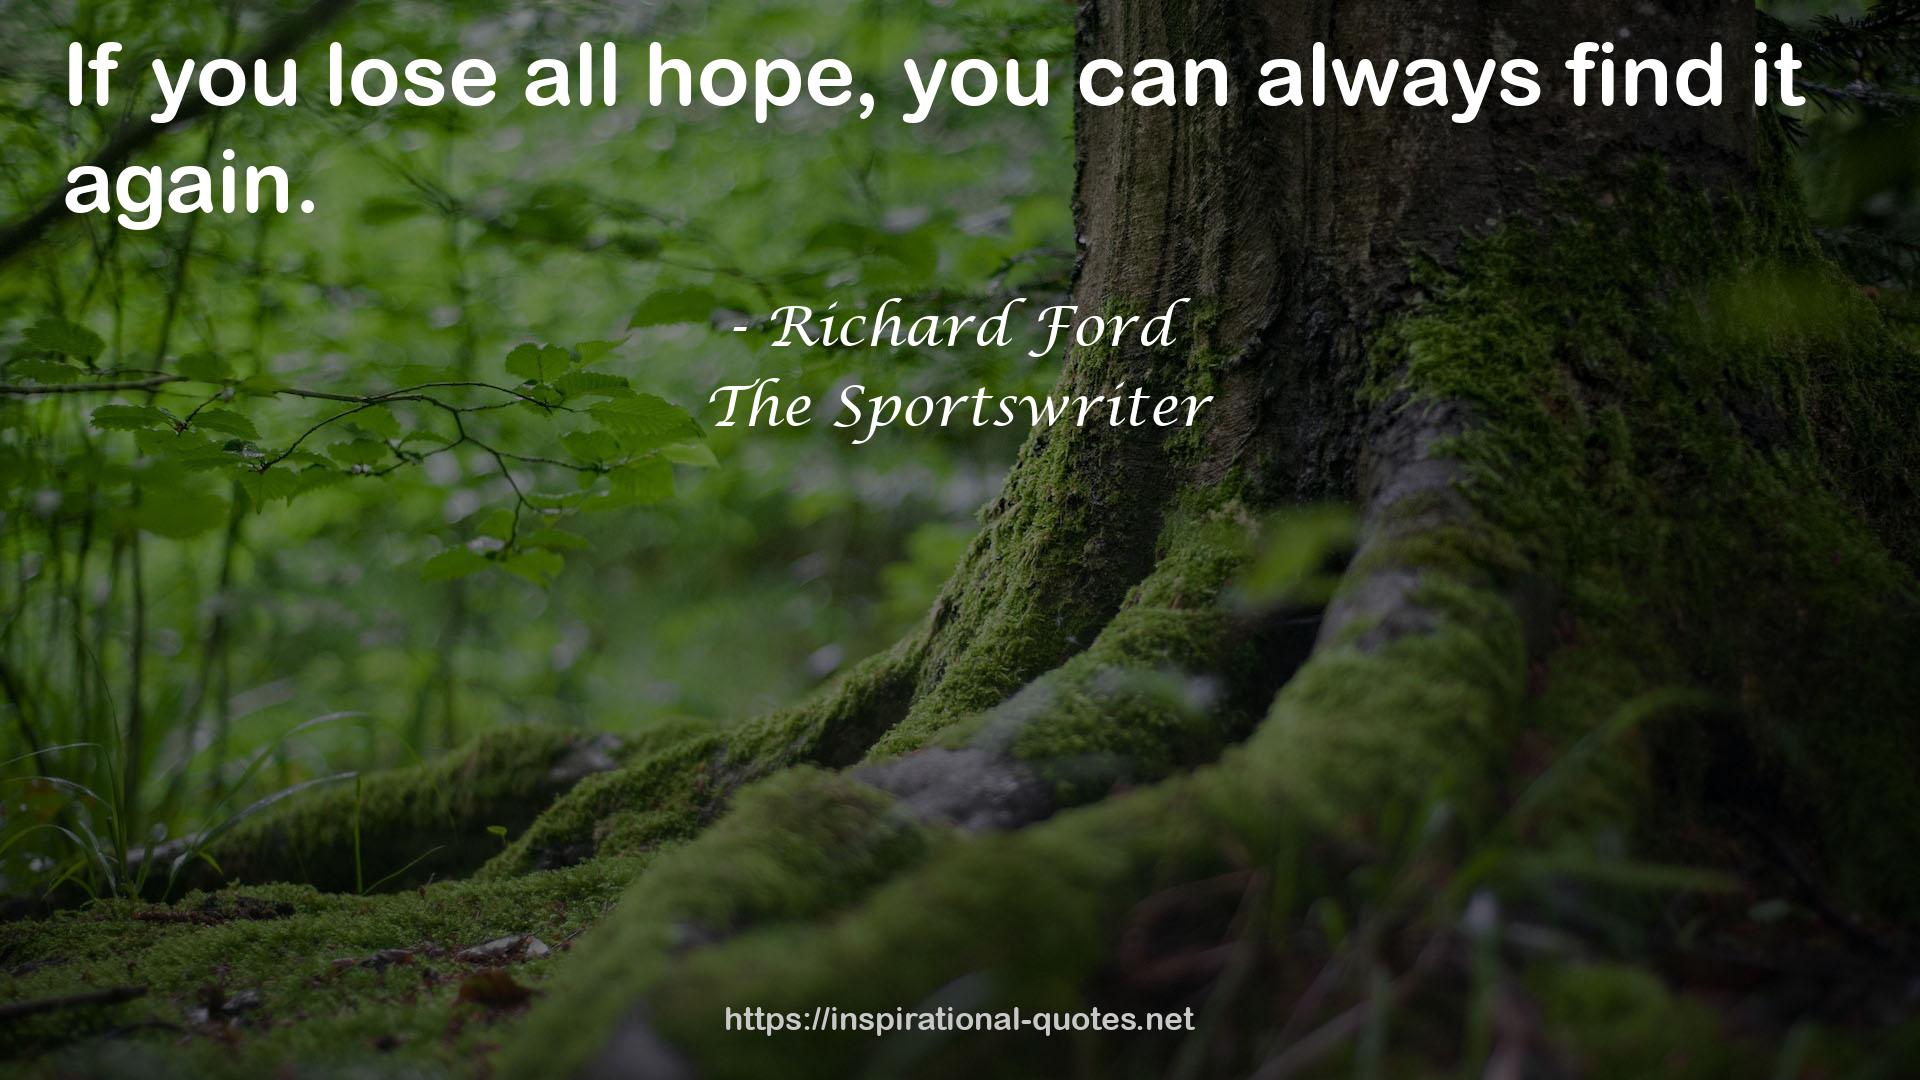 The Sportswriter QUOTES